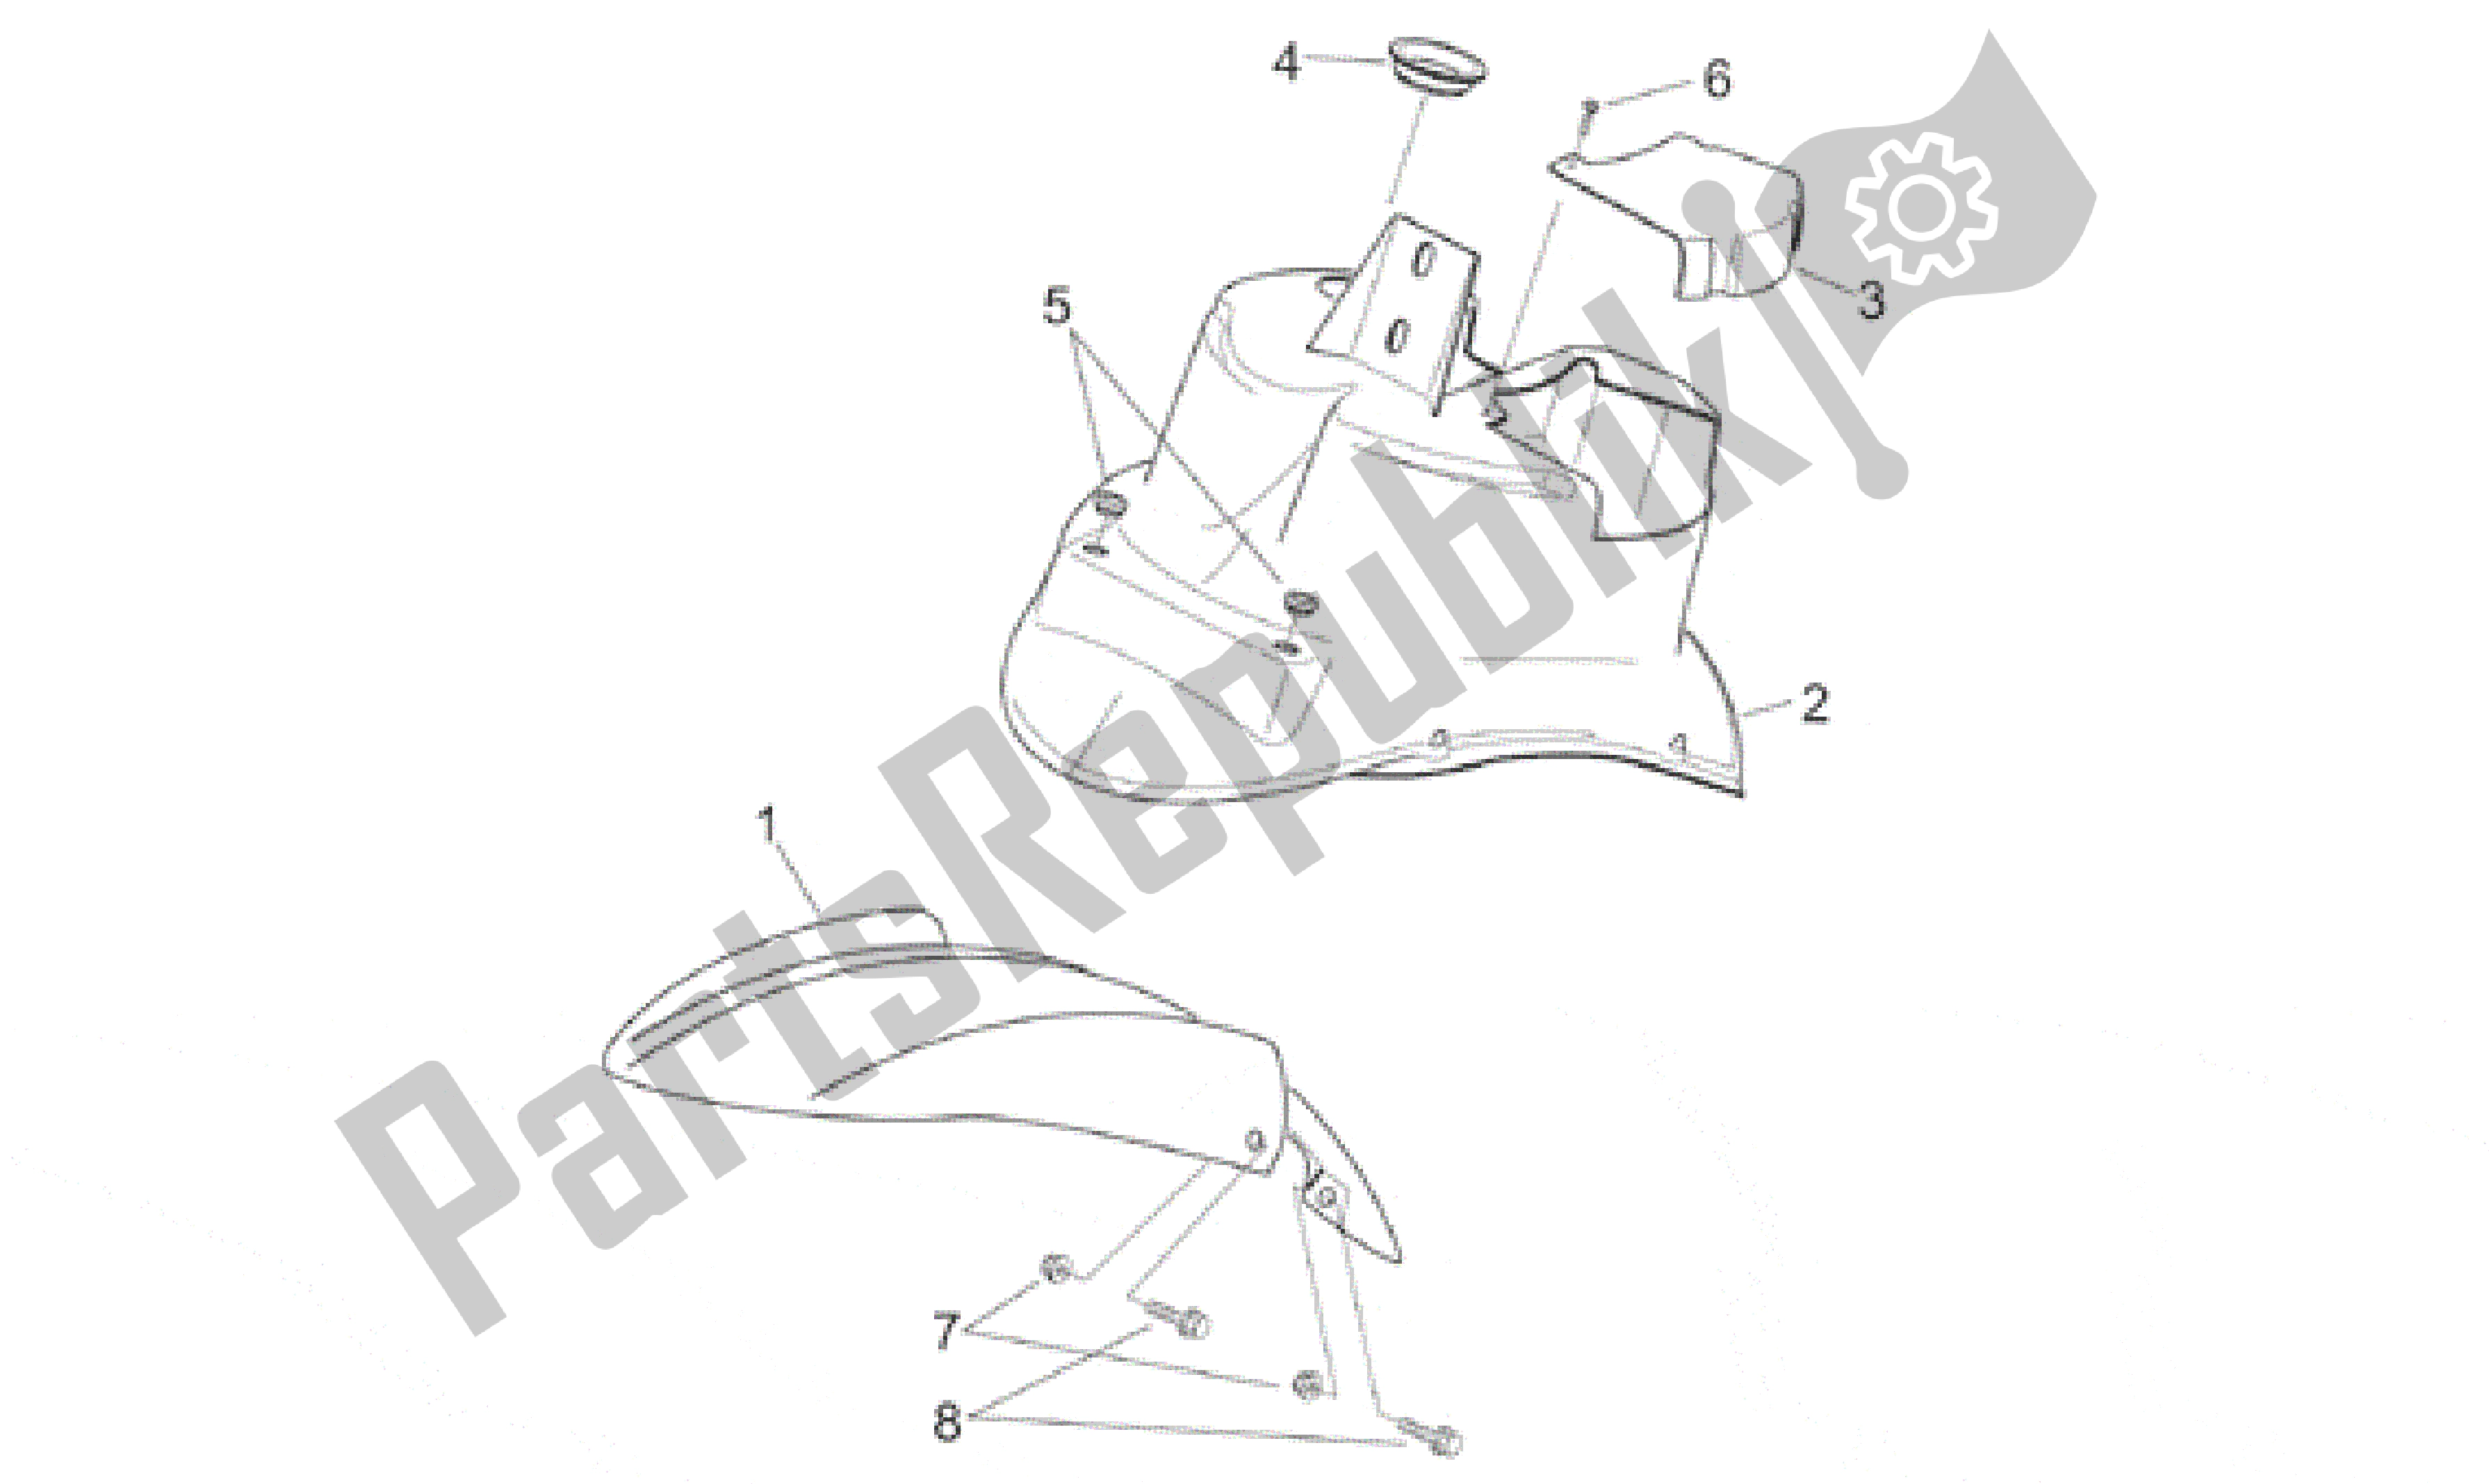 All parts for the Front Body V - Front Mudguard of the Aprilia Sonic 50 1998 - 2001